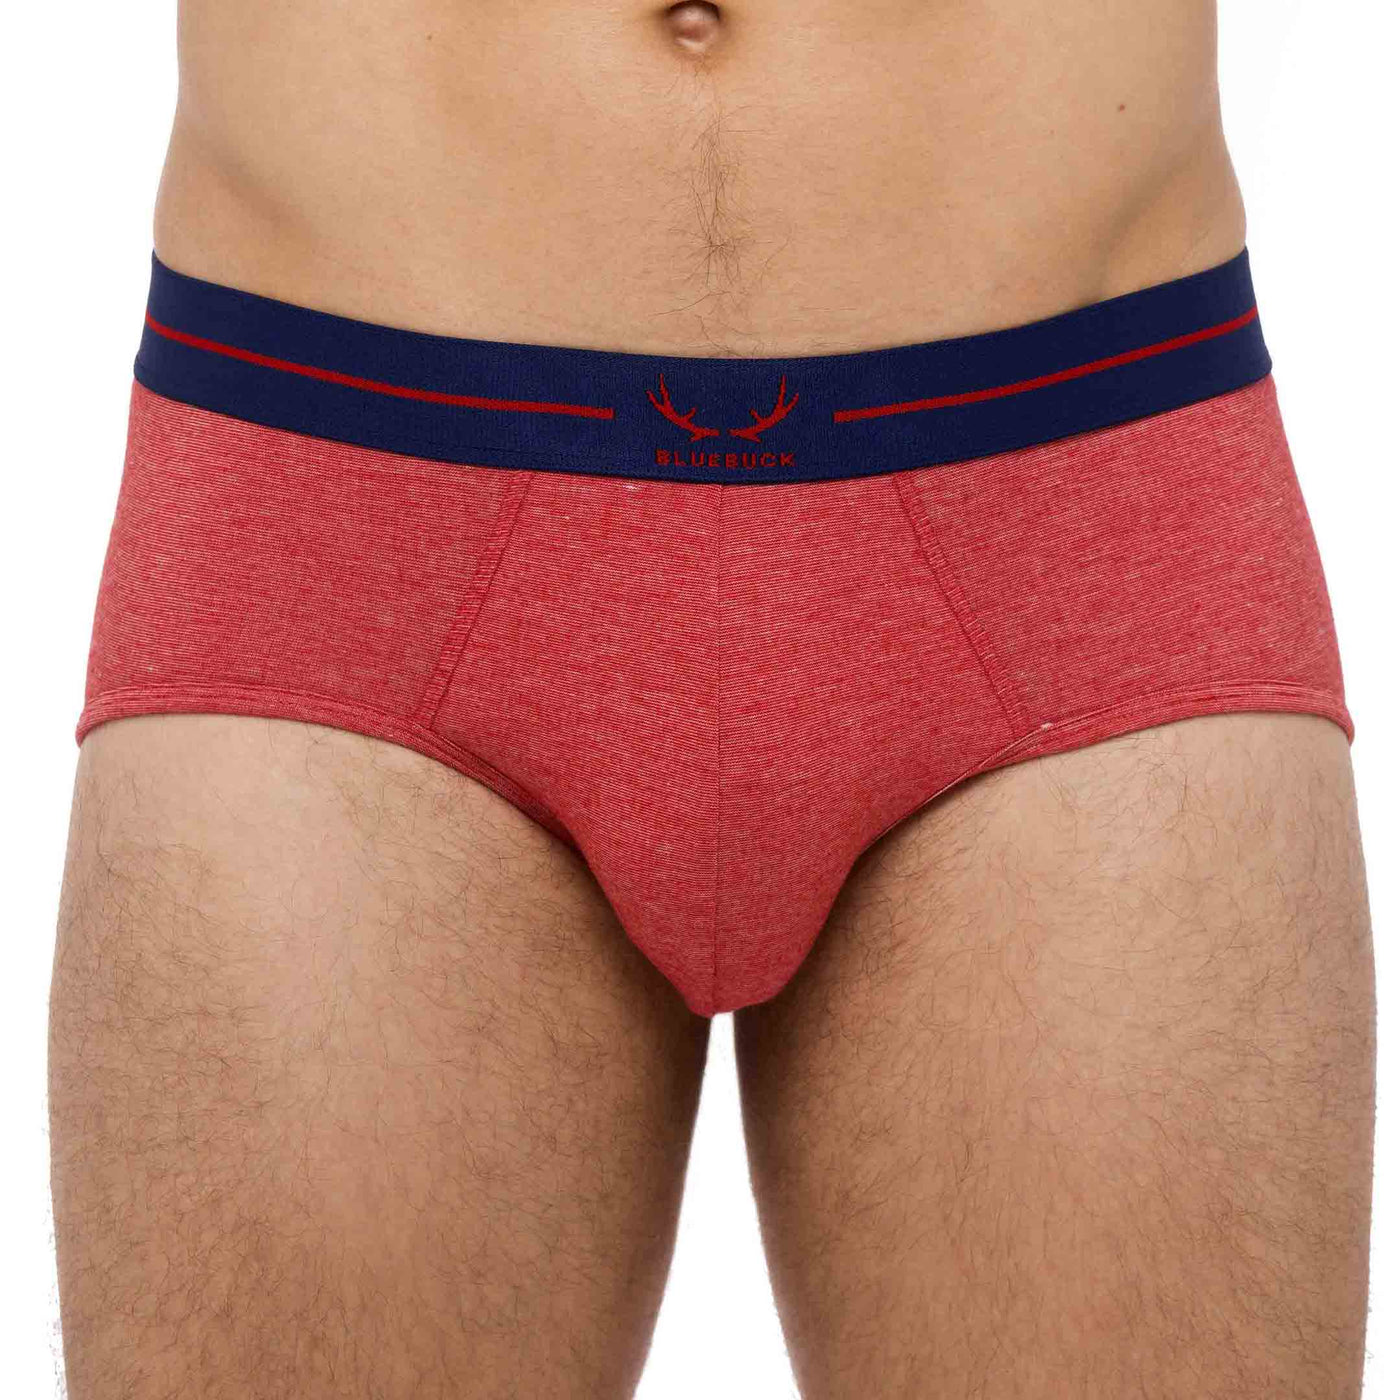 Red brief